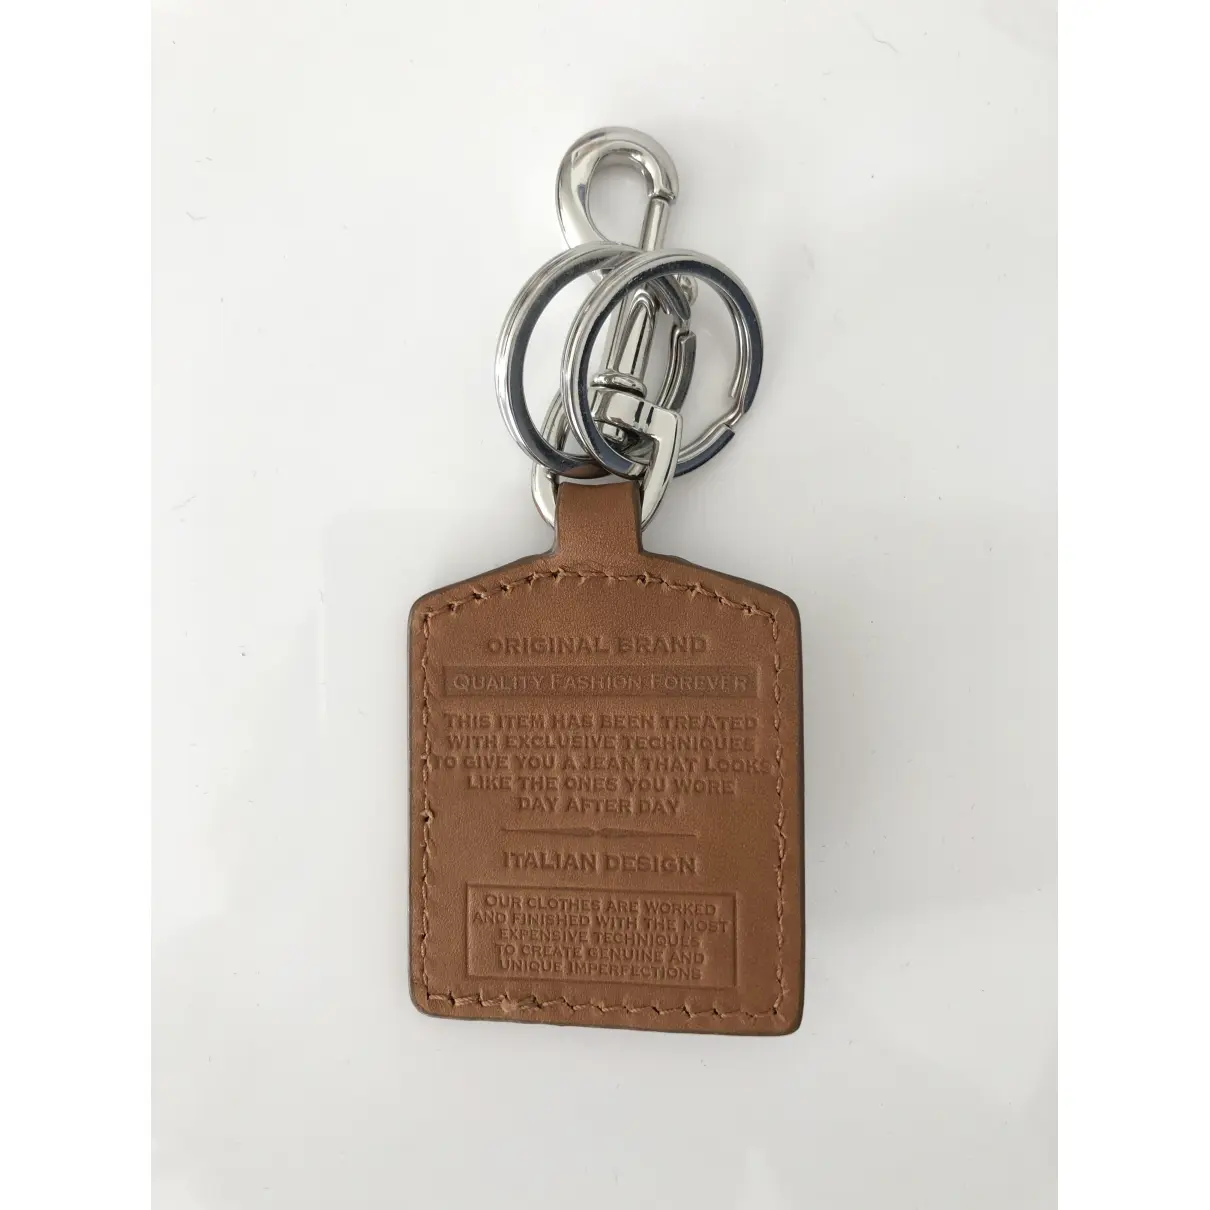 Buy D&G Leather key ring online